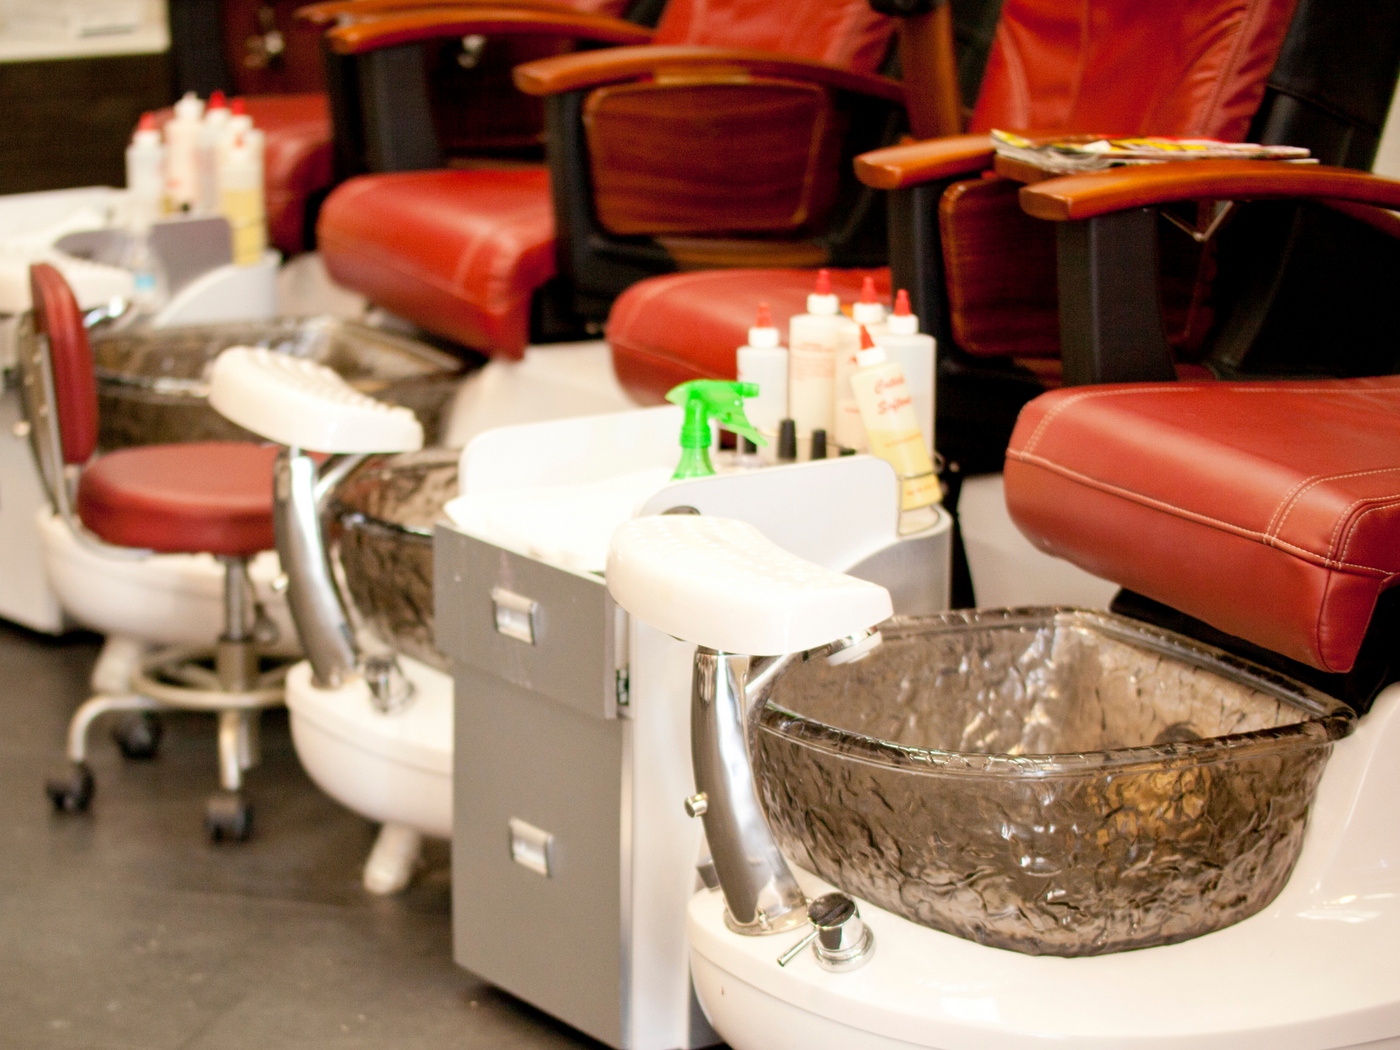 Top Features to Look for in a Spa Pedicure Chair